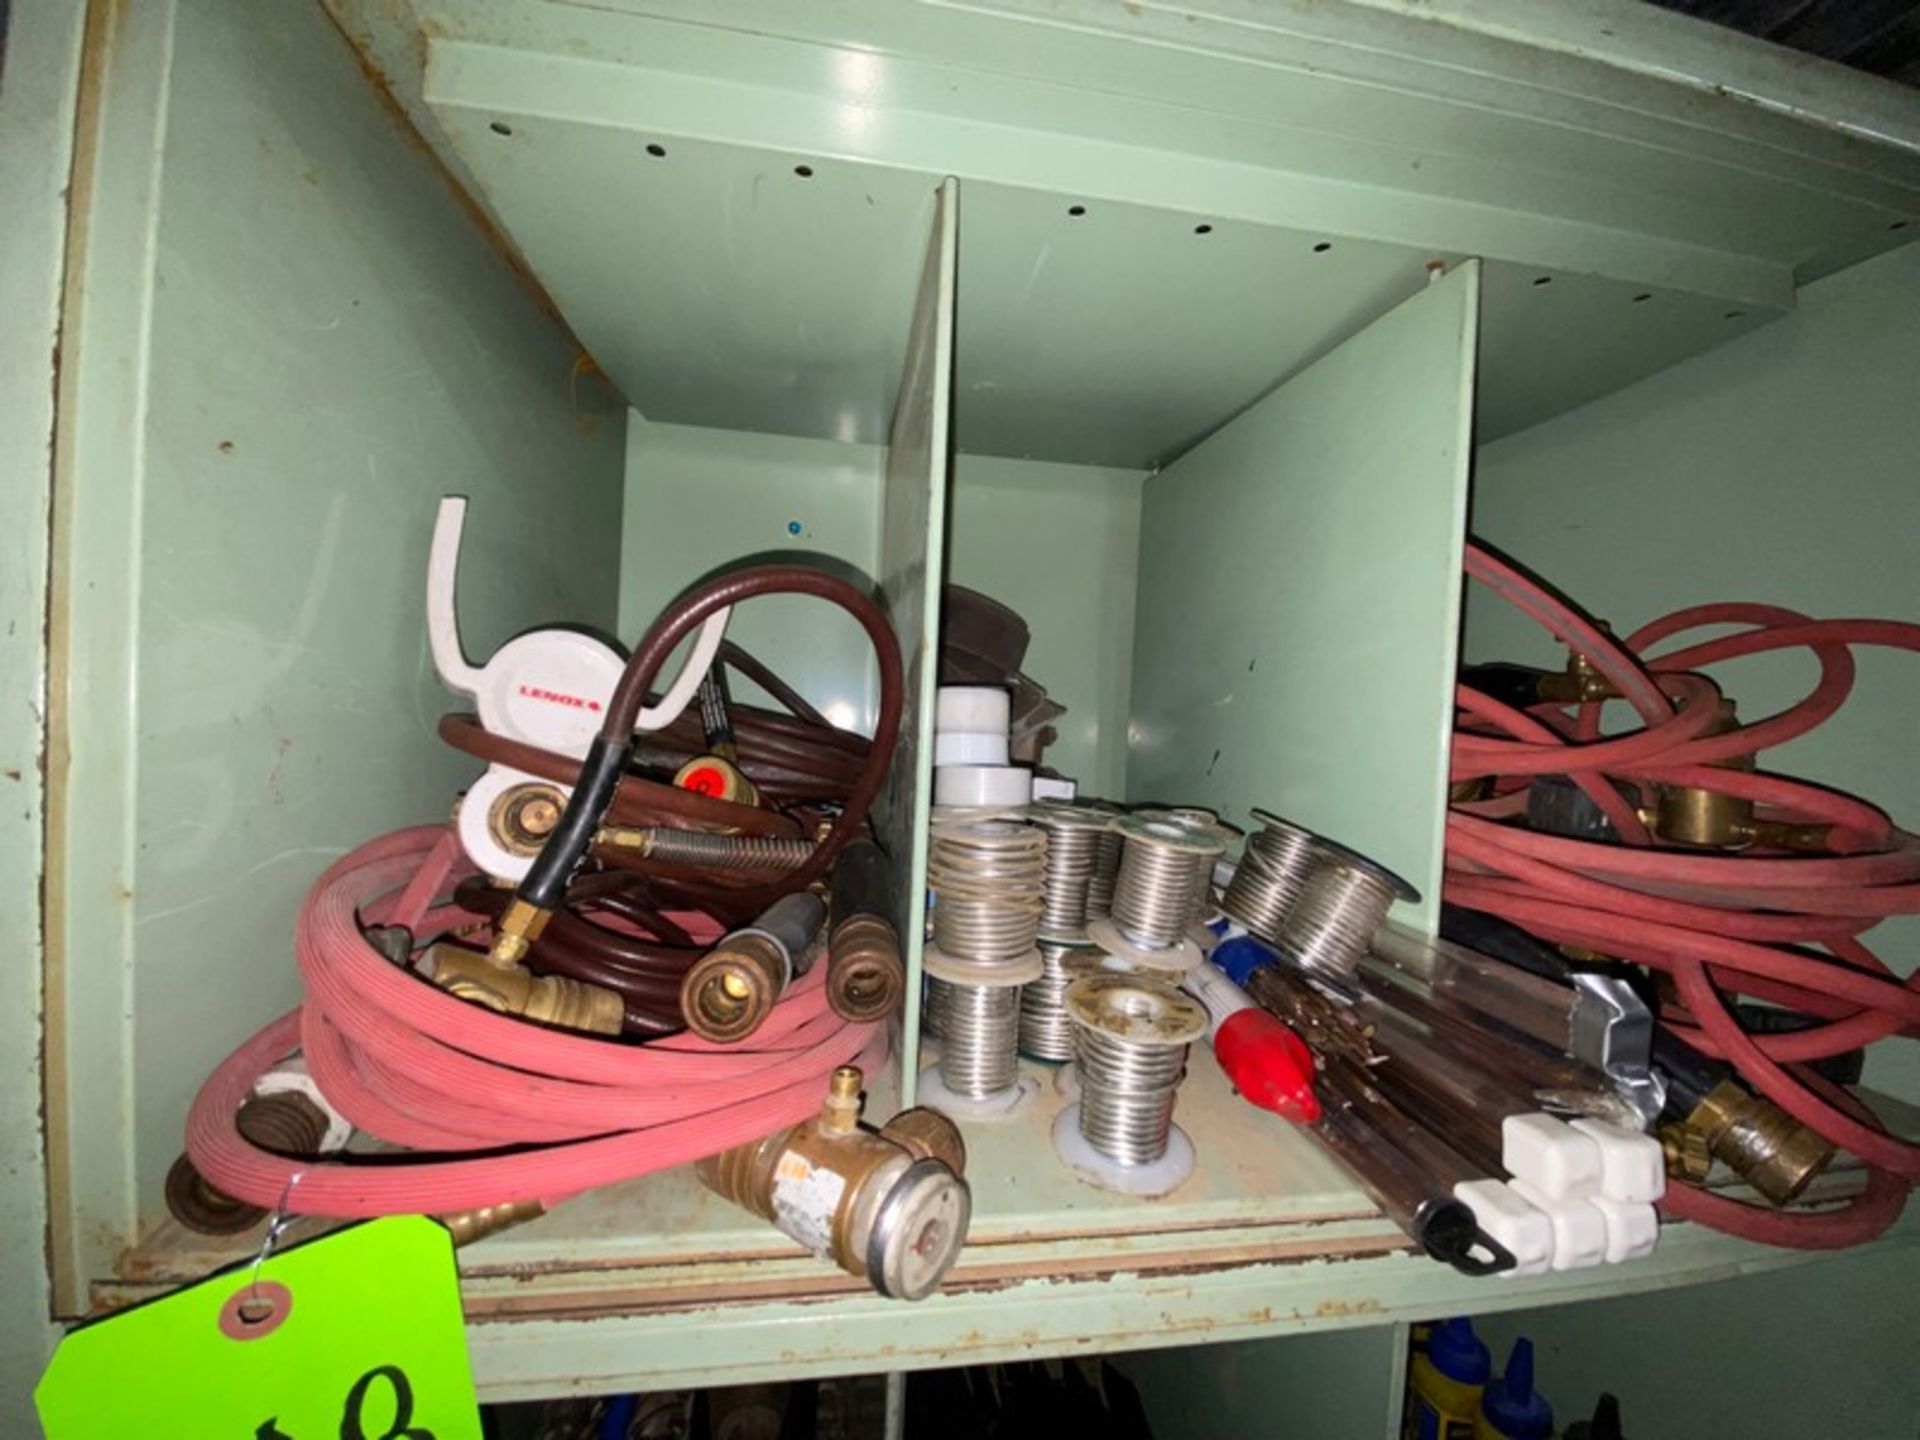 Contents of (3) Cubby Holes, Includes Sprolls of Wire & Assorted Hose (LOCATED IN MONROEVILLE, PA) - Image 2 of 4